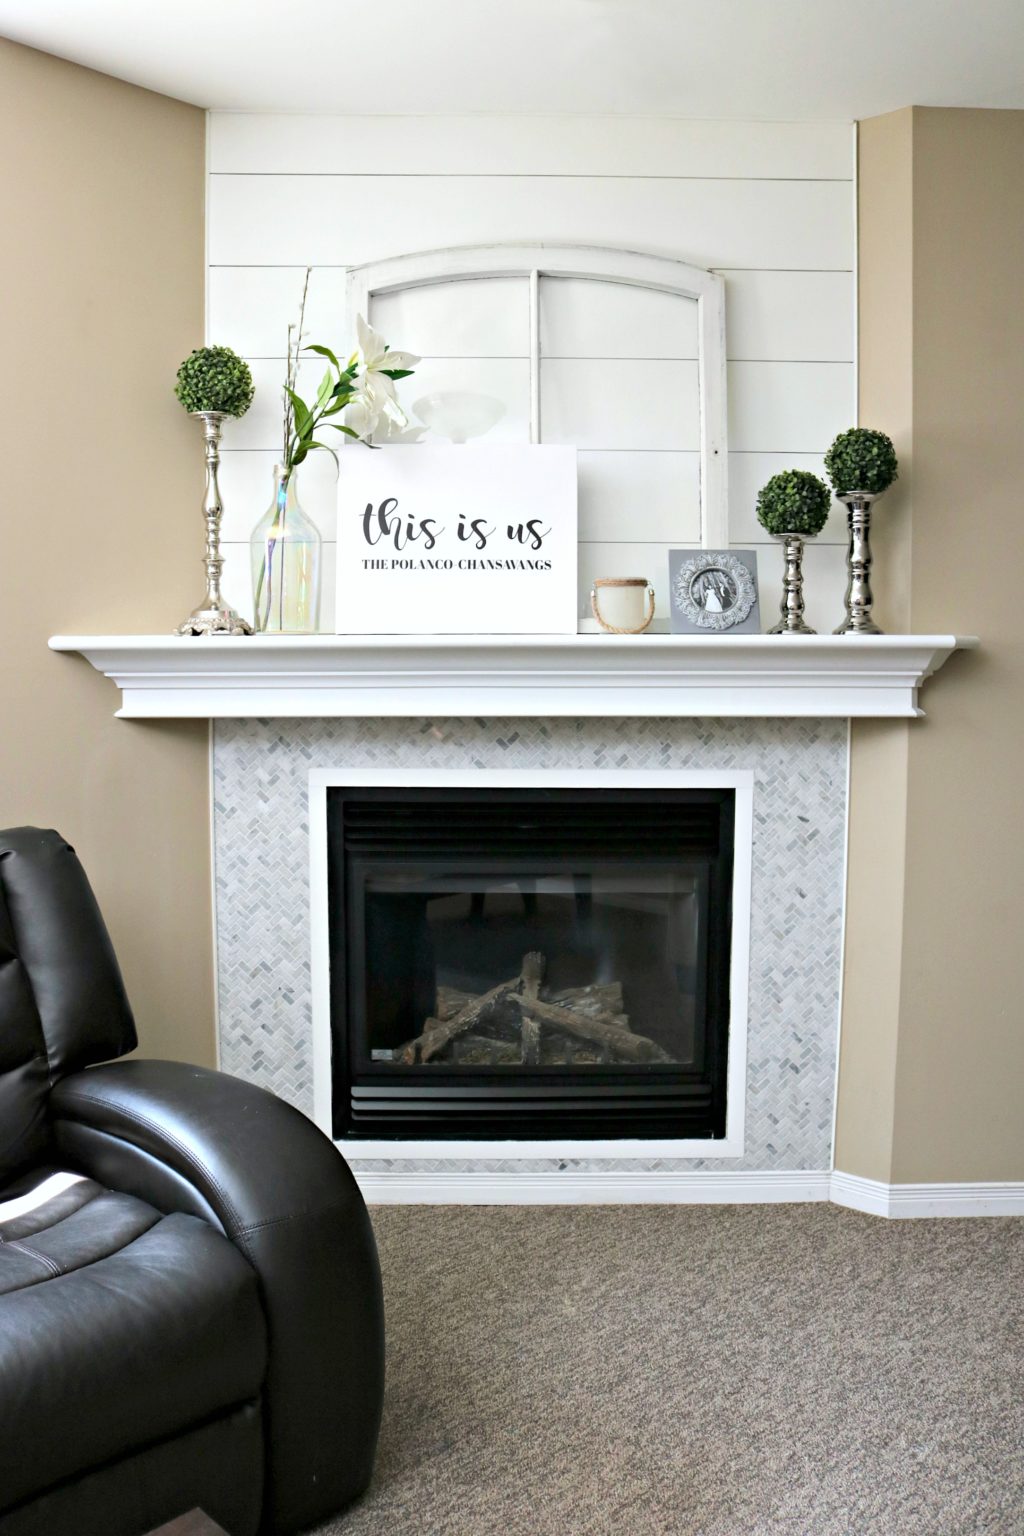 The final product of the newly revamped fireplace and mantle. See how you can revamp your fireplace!